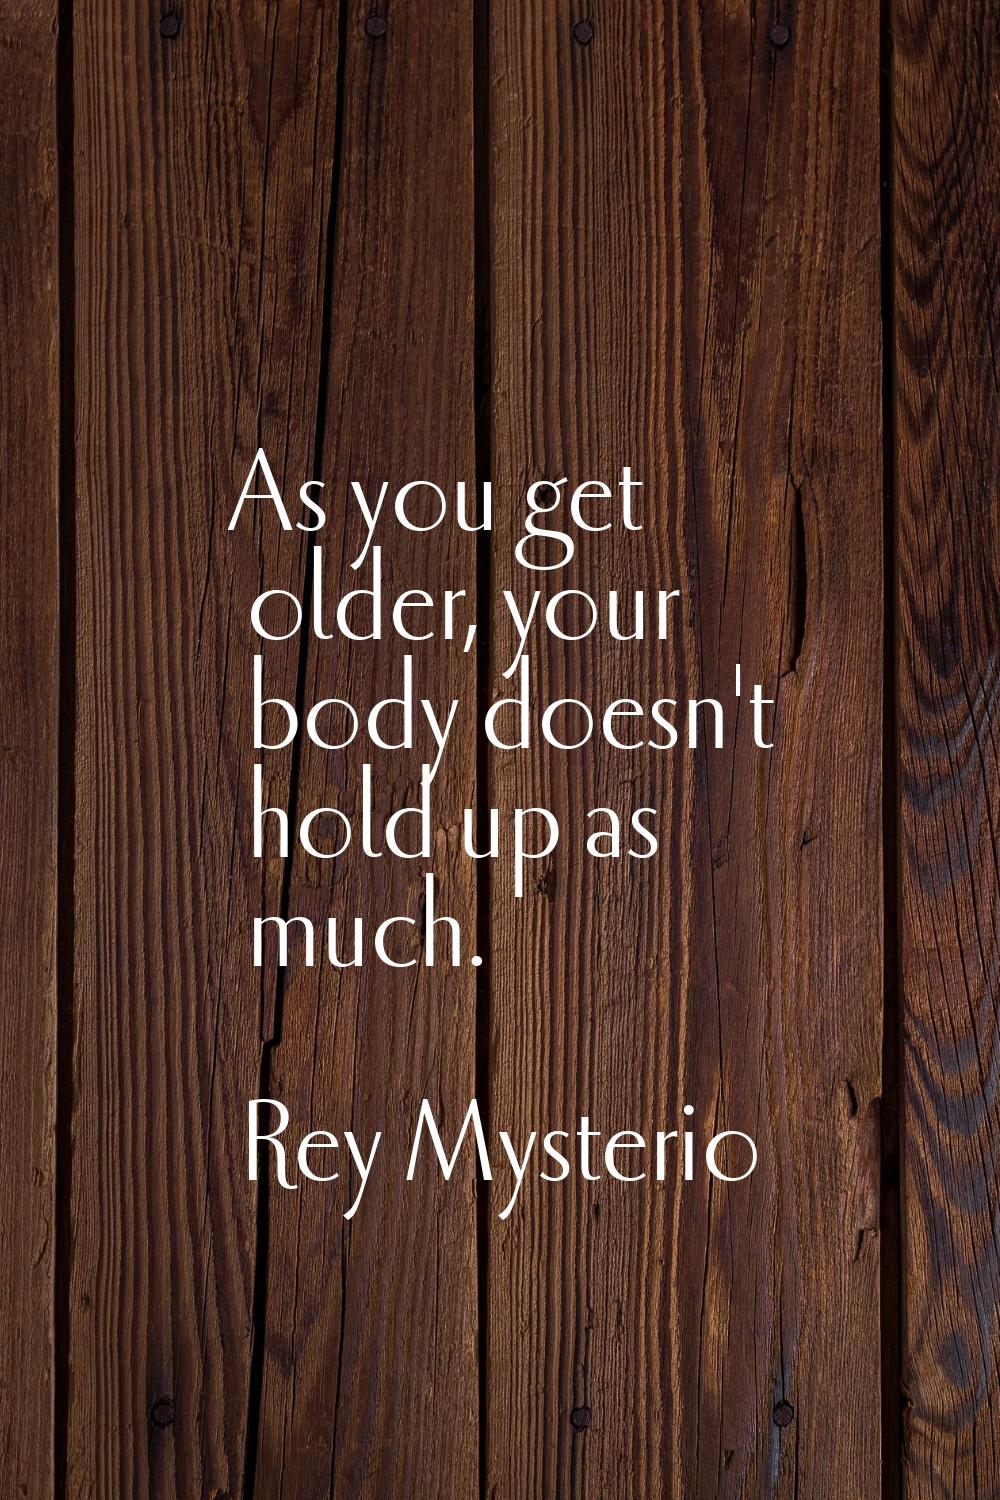 As you get older, your body doesn't hold up as much.